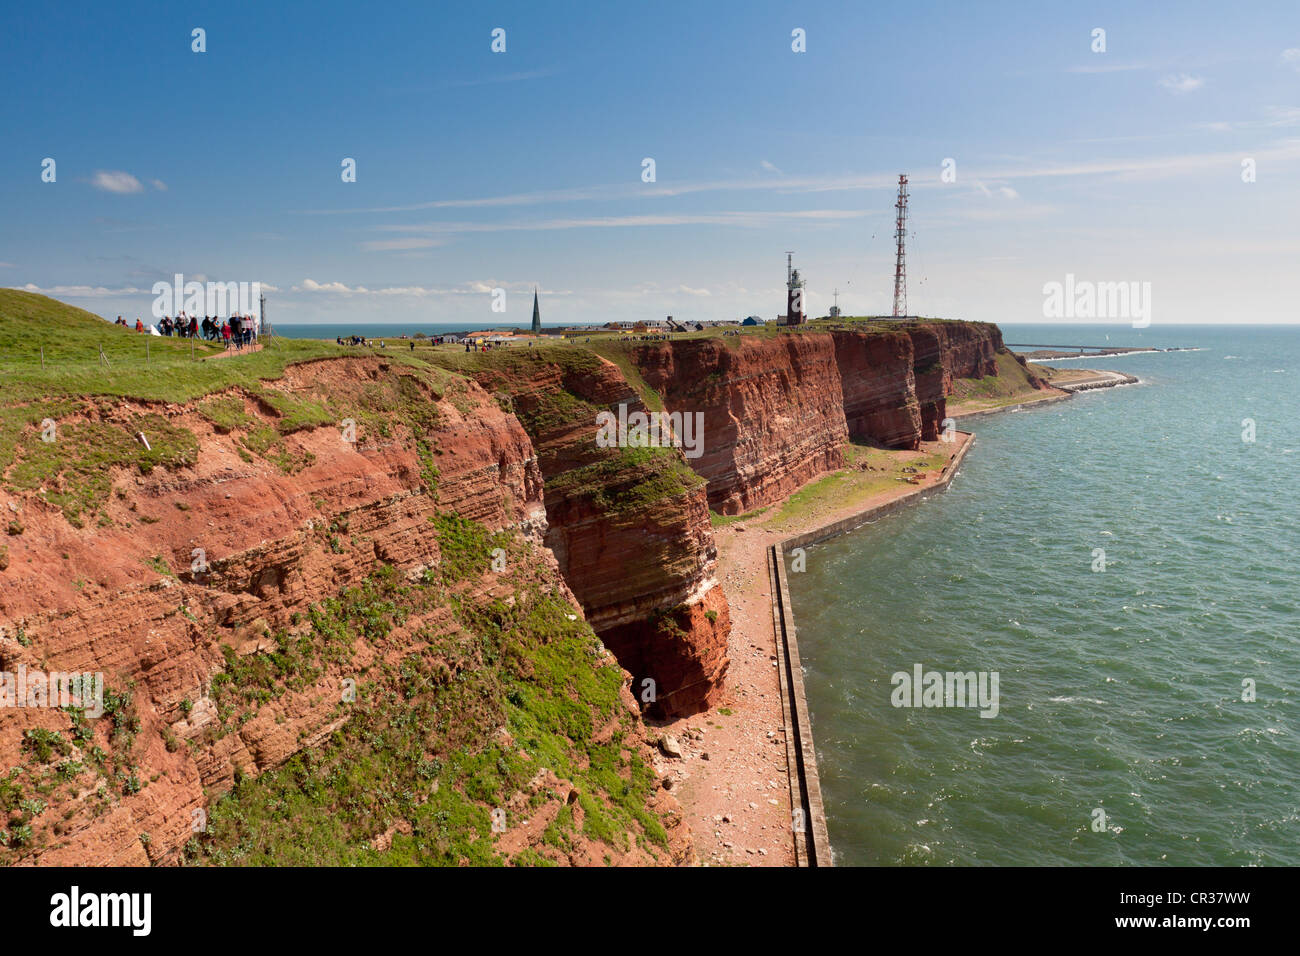 The prominent steep red sandstone cliffs of Heligoland with its lighthouse and a radio tower, Helgoland, Schleswig-Holstein Stock Photo